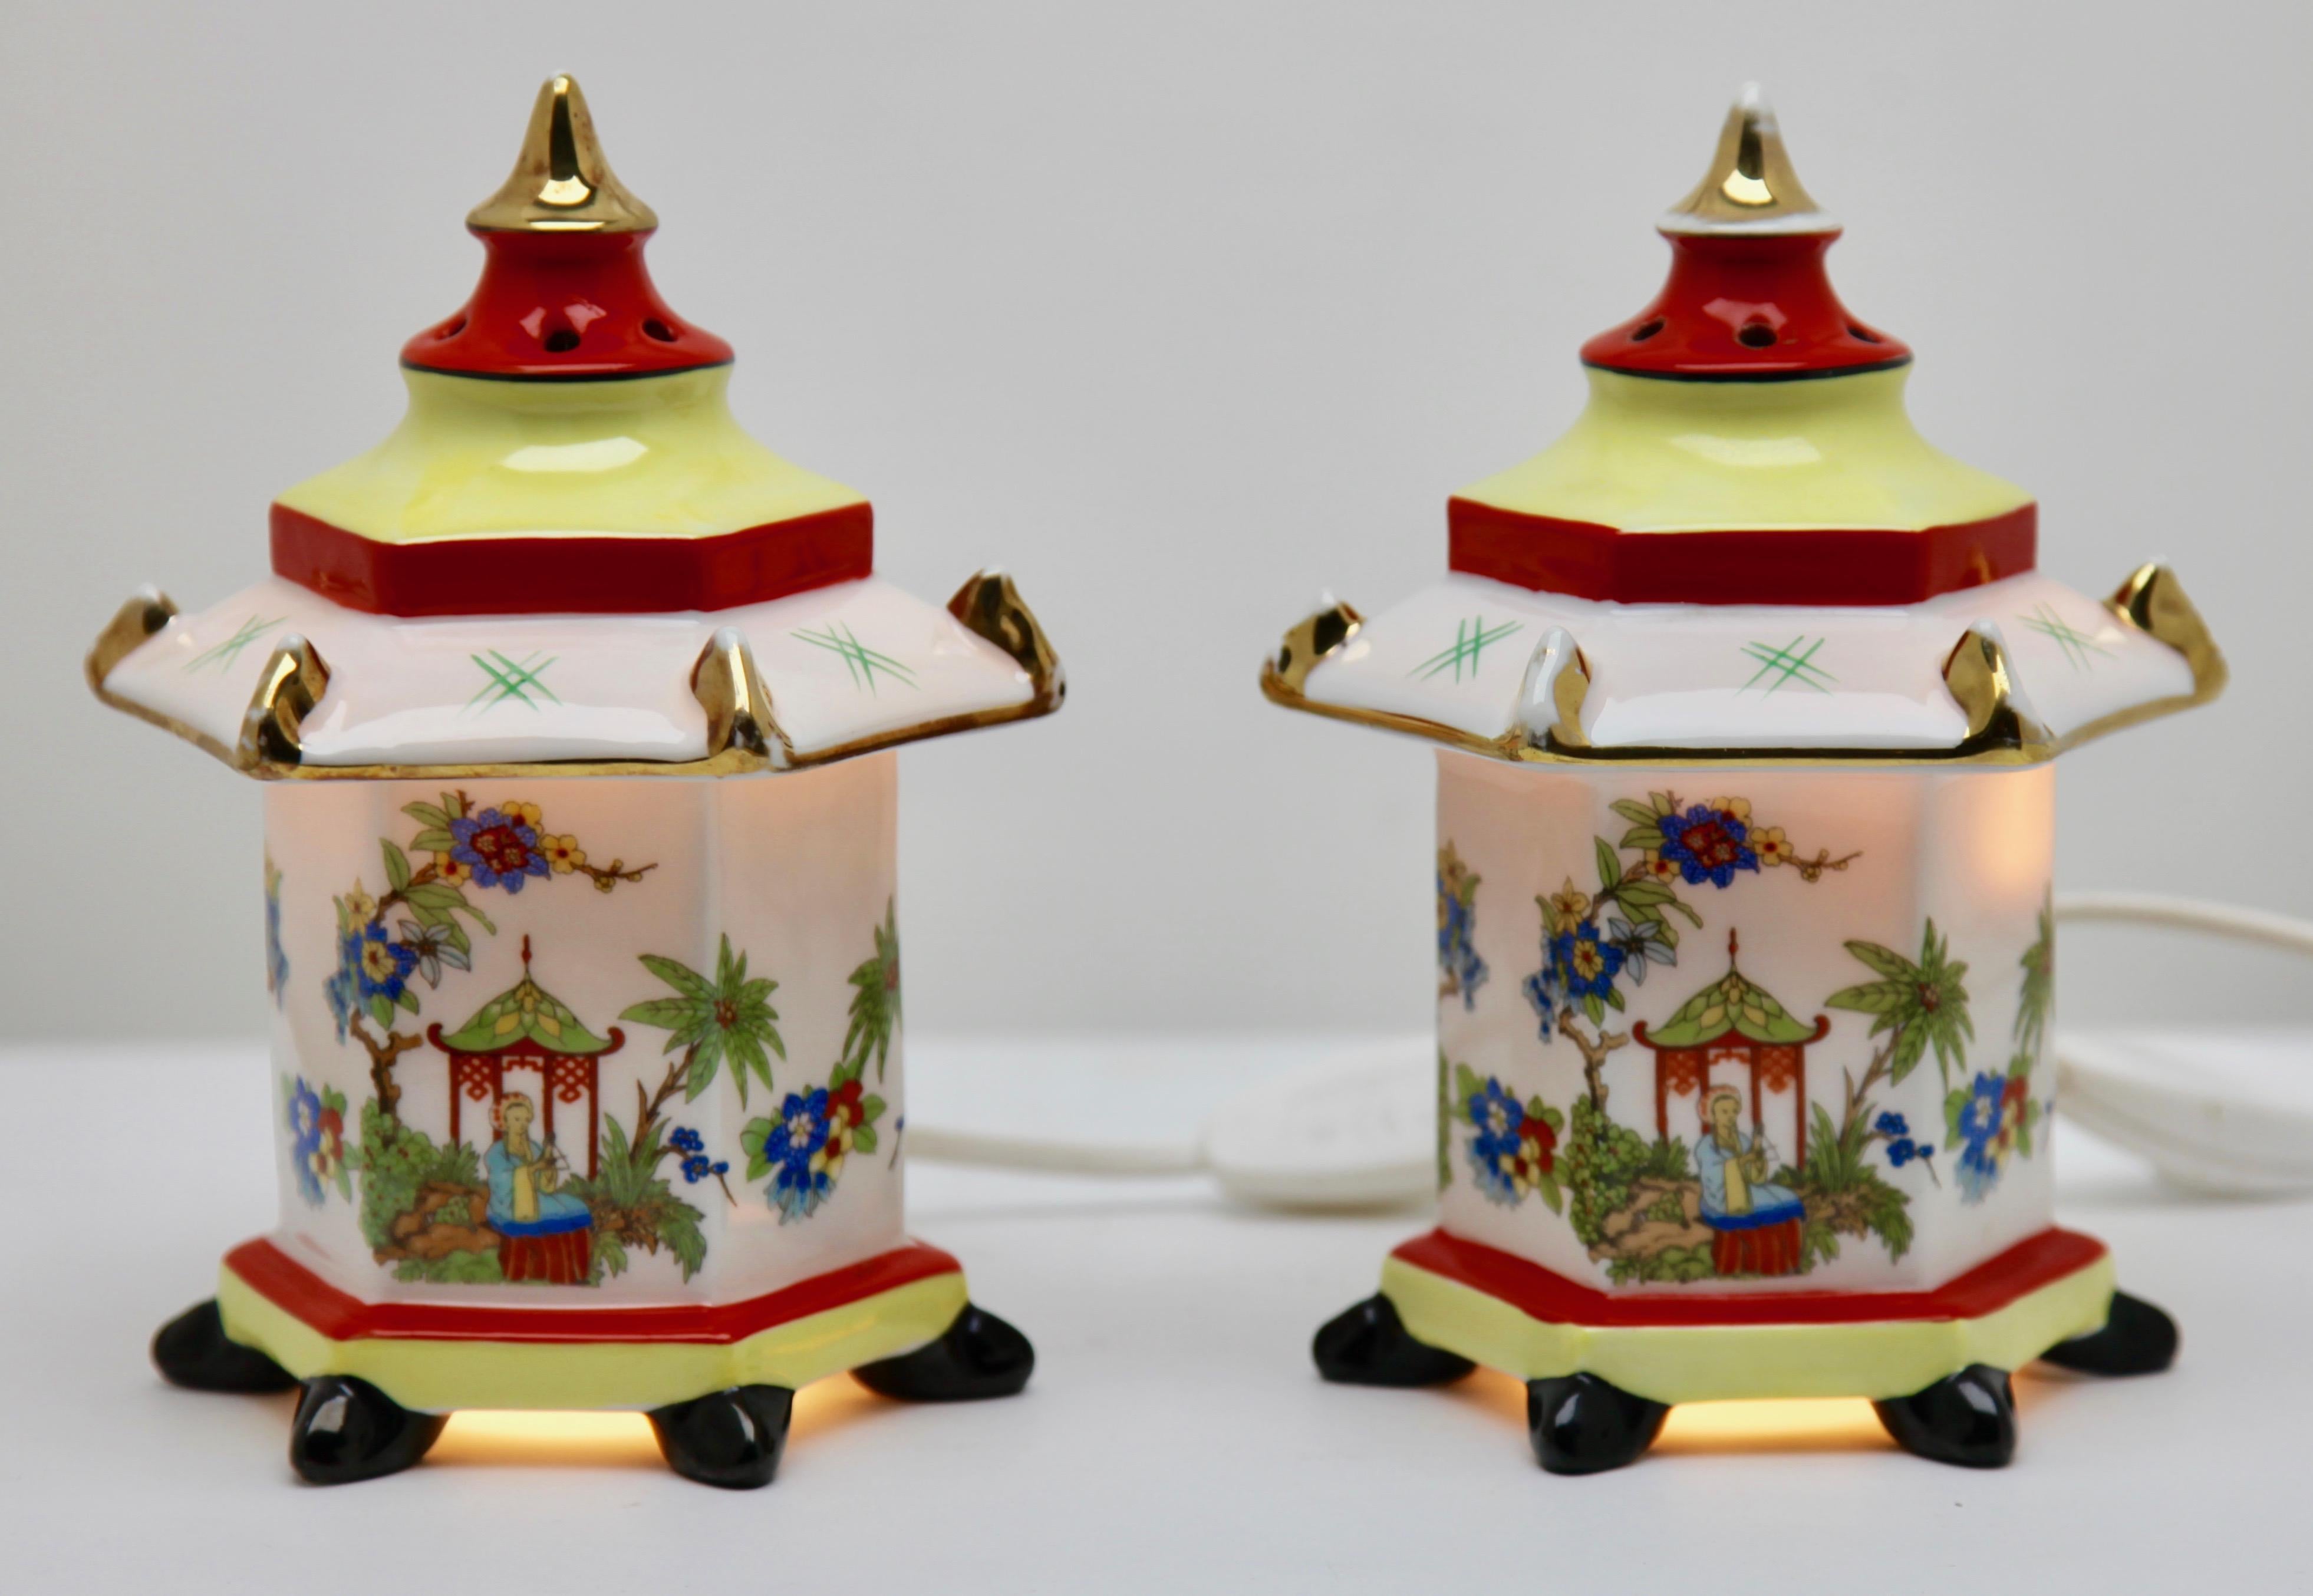 Rare and gorgeous Pagode pair of perfume lamps Gerold & Co. Tettau Bavaria
In excellent condition and in full working order having recently been re-wired 

Germany, 1930s, excellent condition
Porcelain air purifier/table lamp, 1930s. Undamaged